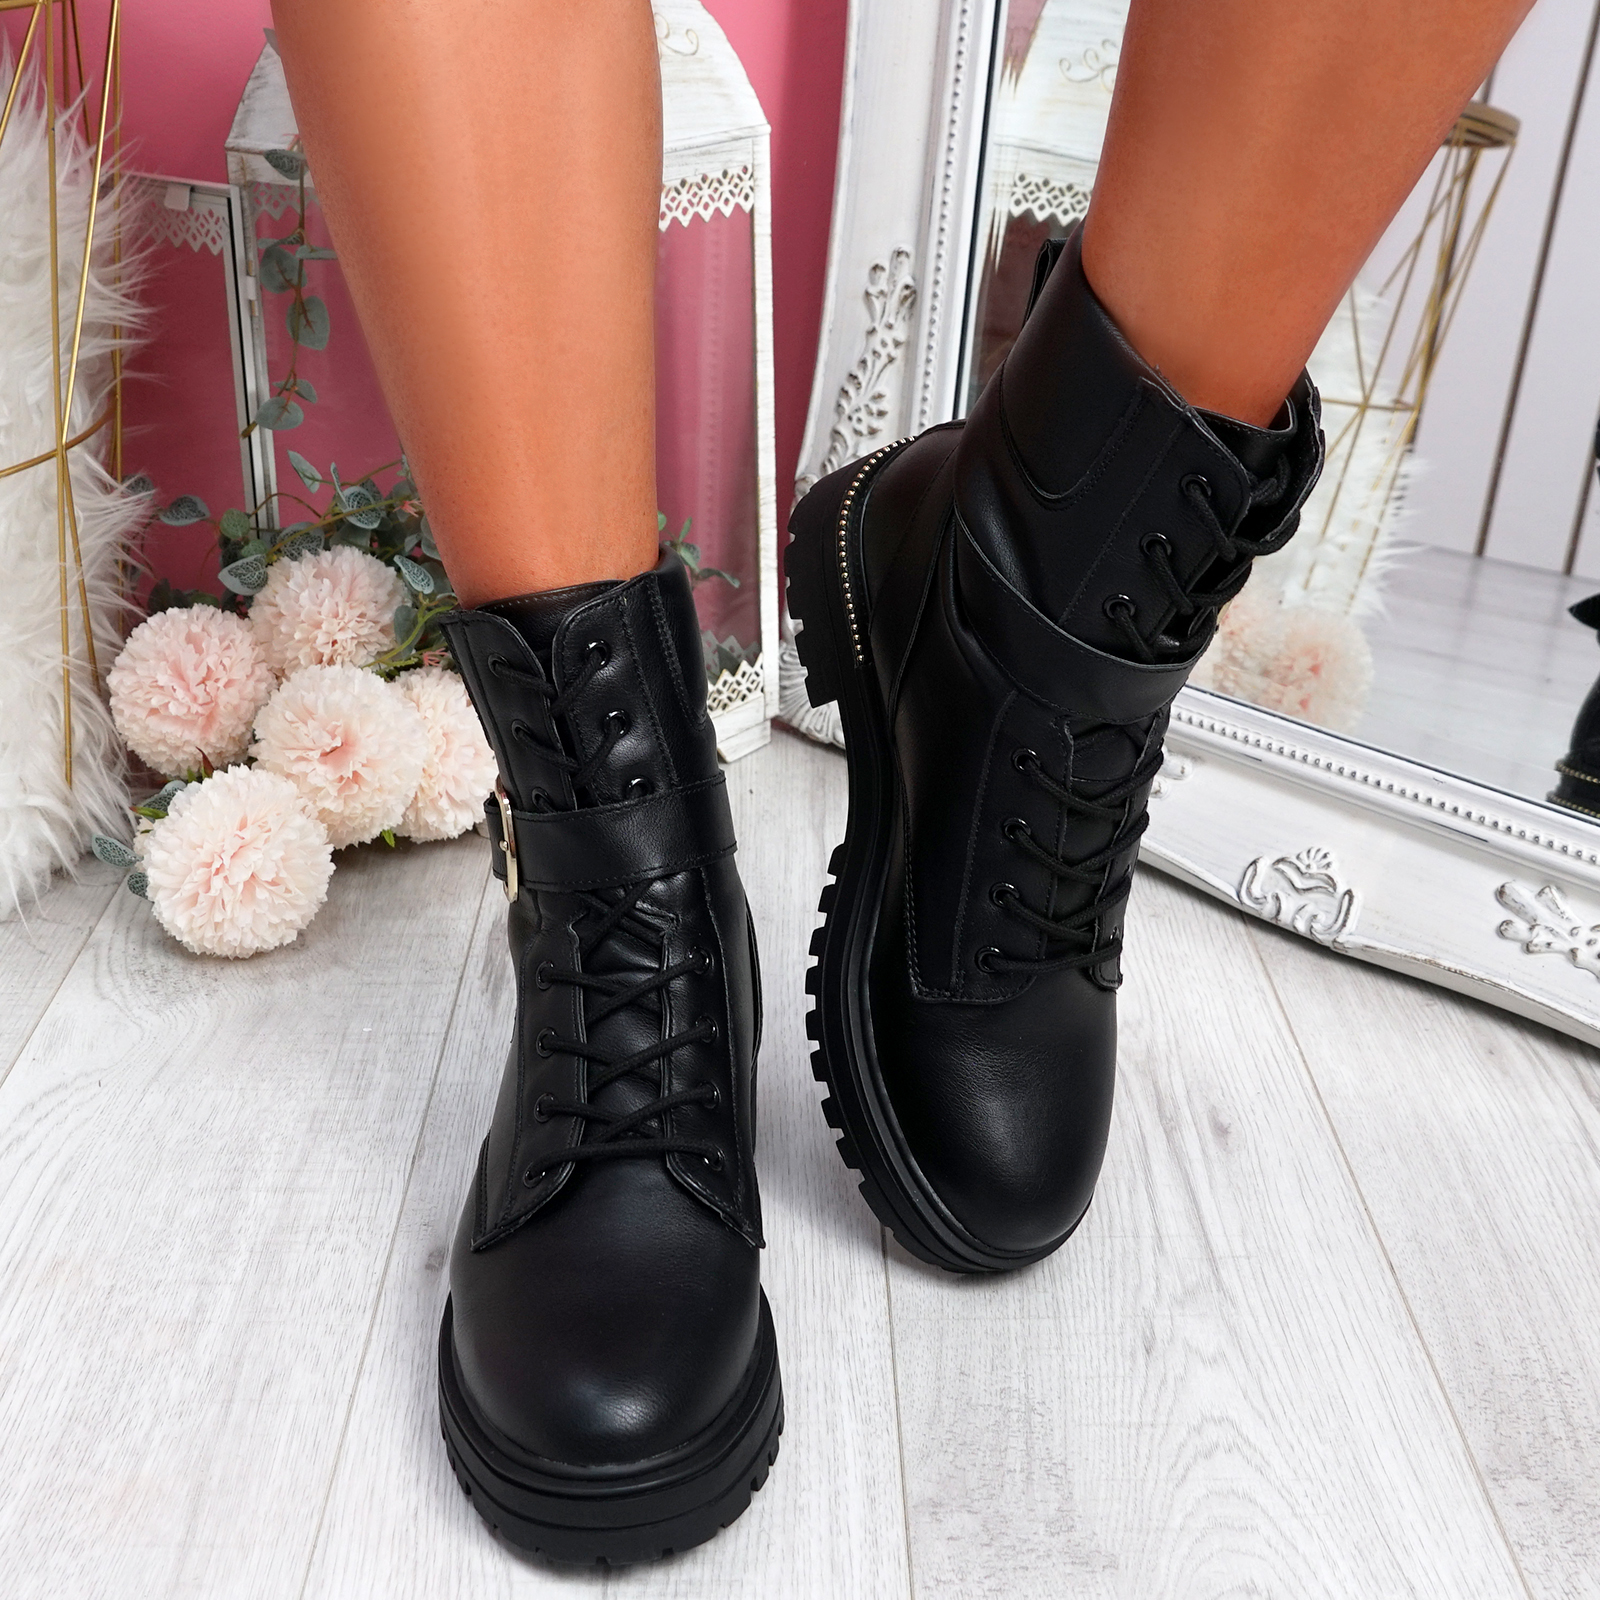 WOMENS LADIES BUCKLE LACE UP BIKER BOOTS STUDDED PARTY WOMEN BOOT SHOES SIZE | eBay